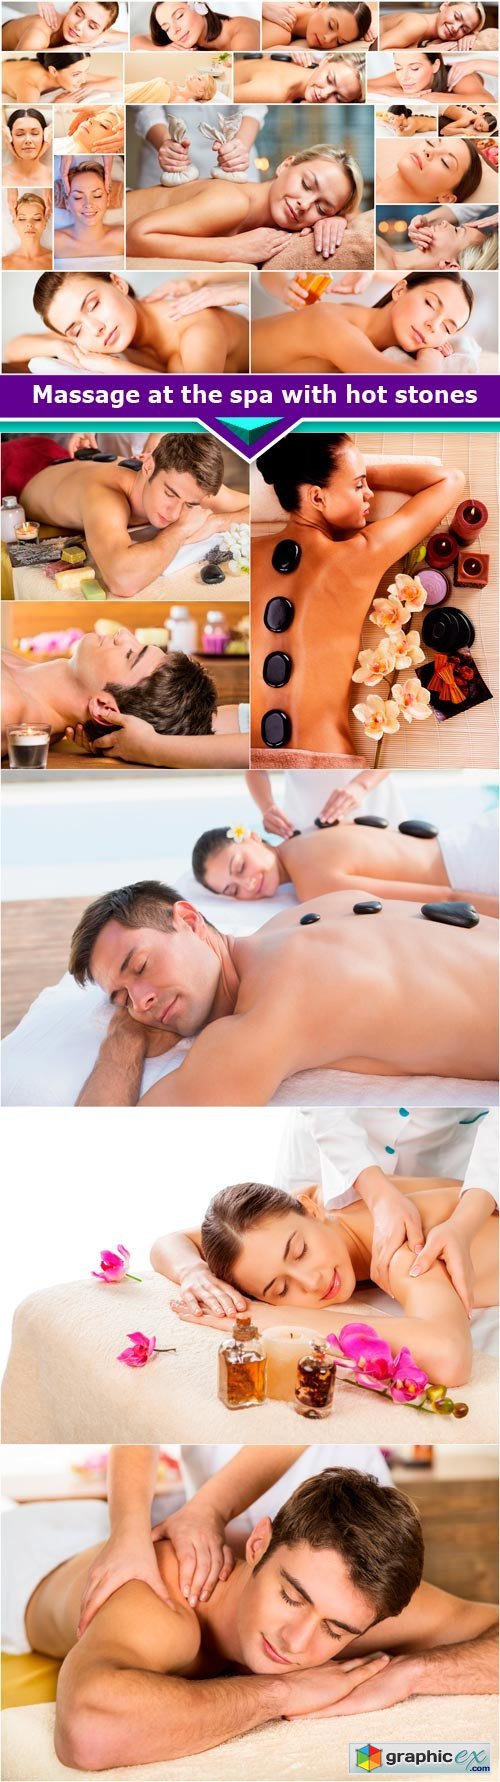 Massage at the spa with hot stones 7x JPEG